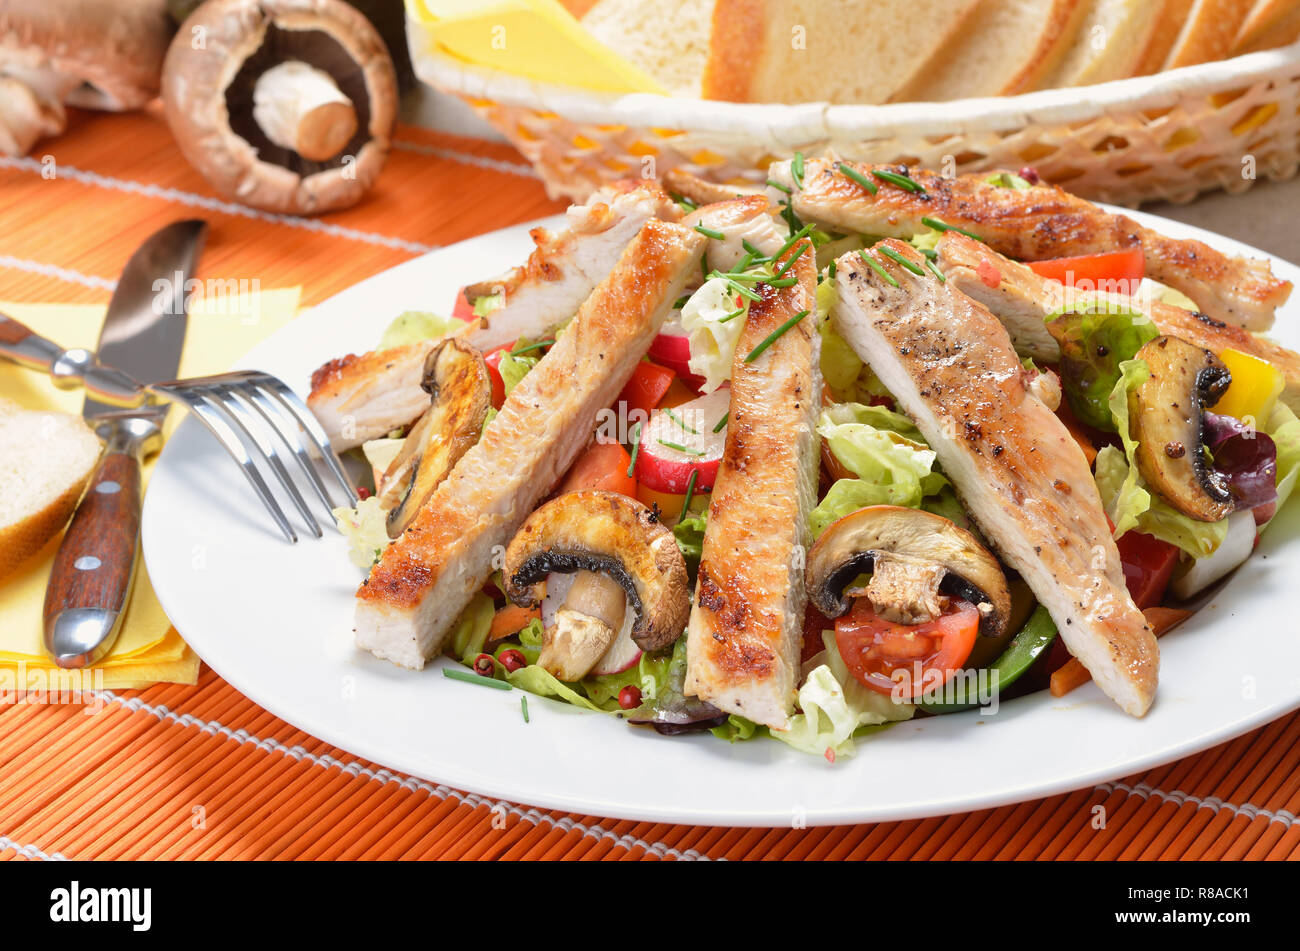 Grilled turkey and fried mushrooms on fresh salad Stock Photo